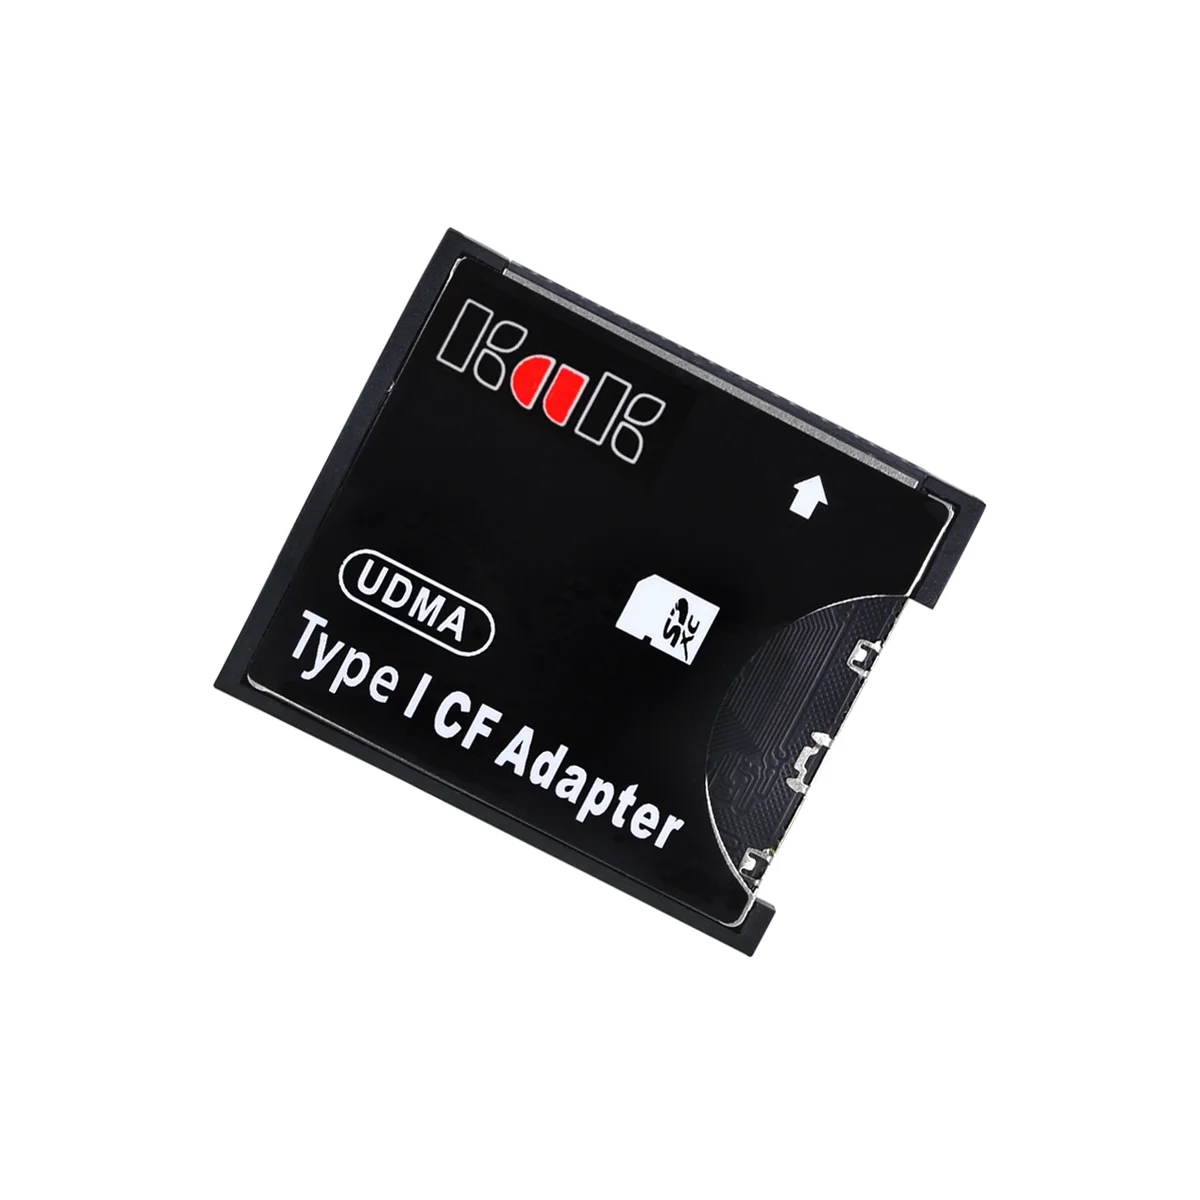 

SD To CF Type I Adapter Support SD SDHC SDXC MMC Card To Standard Compact Flash Type I Card Reader Converter